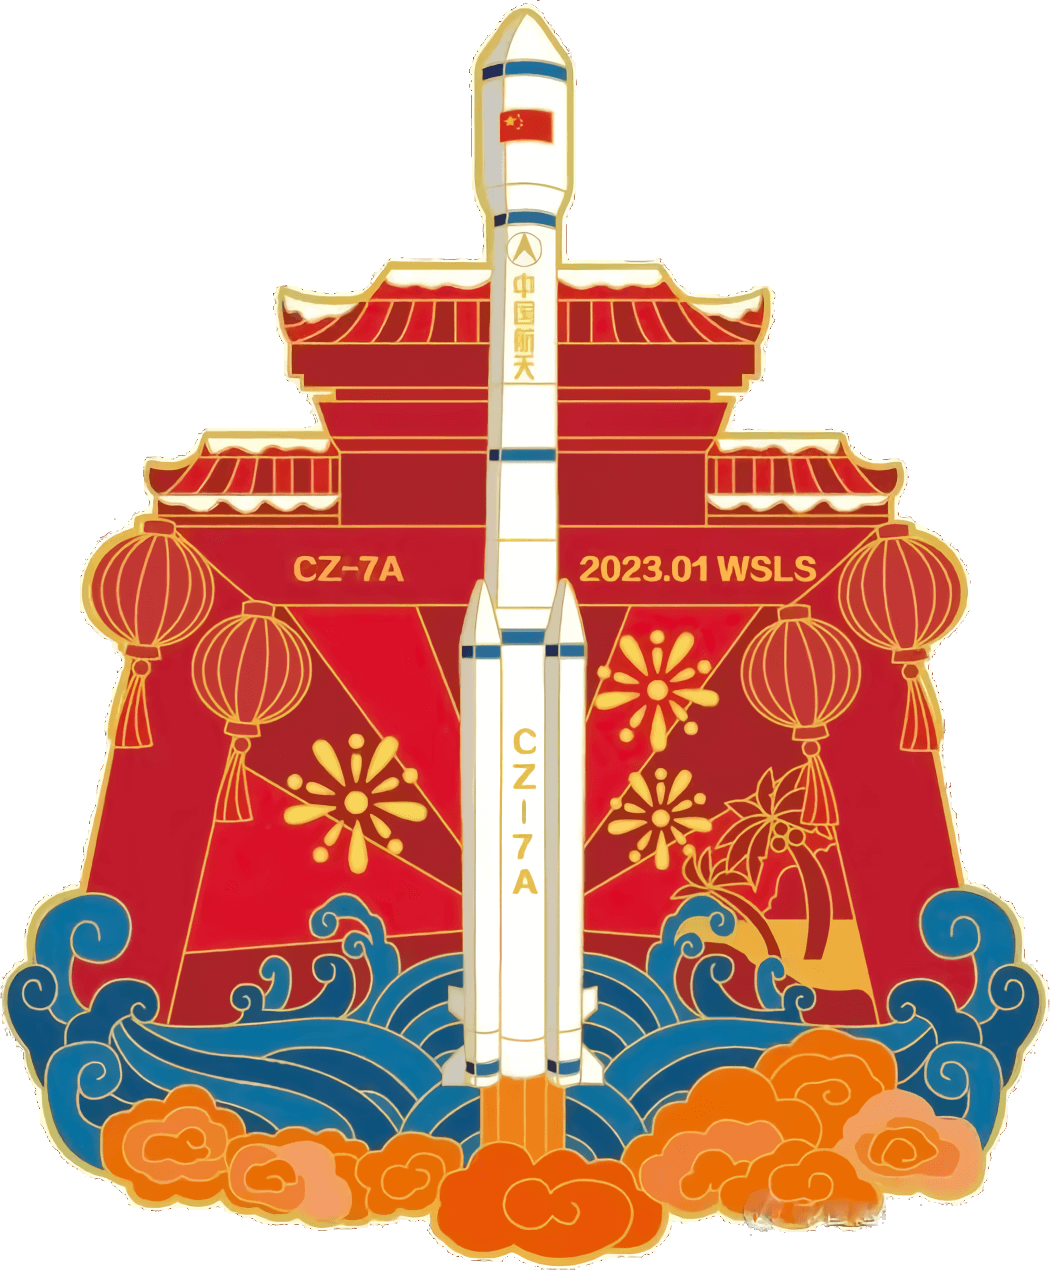 Mission patch for Shijian 23